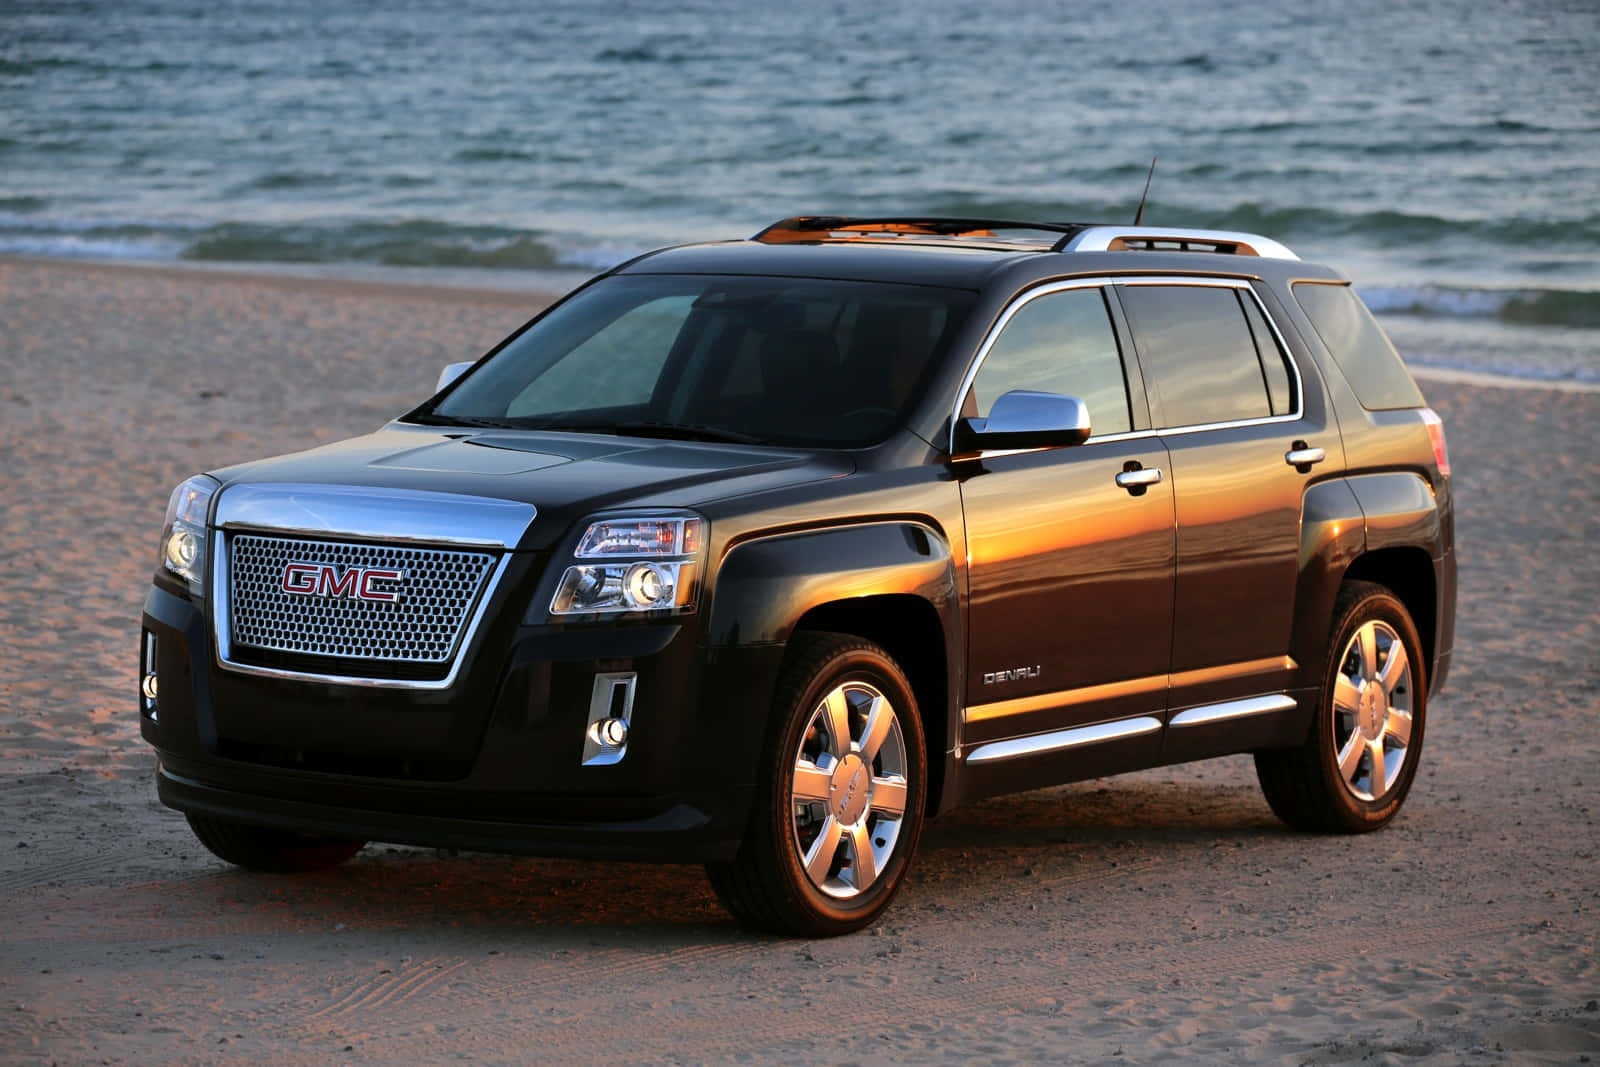 GMC Terrain with a stunning appearance Wallpaper